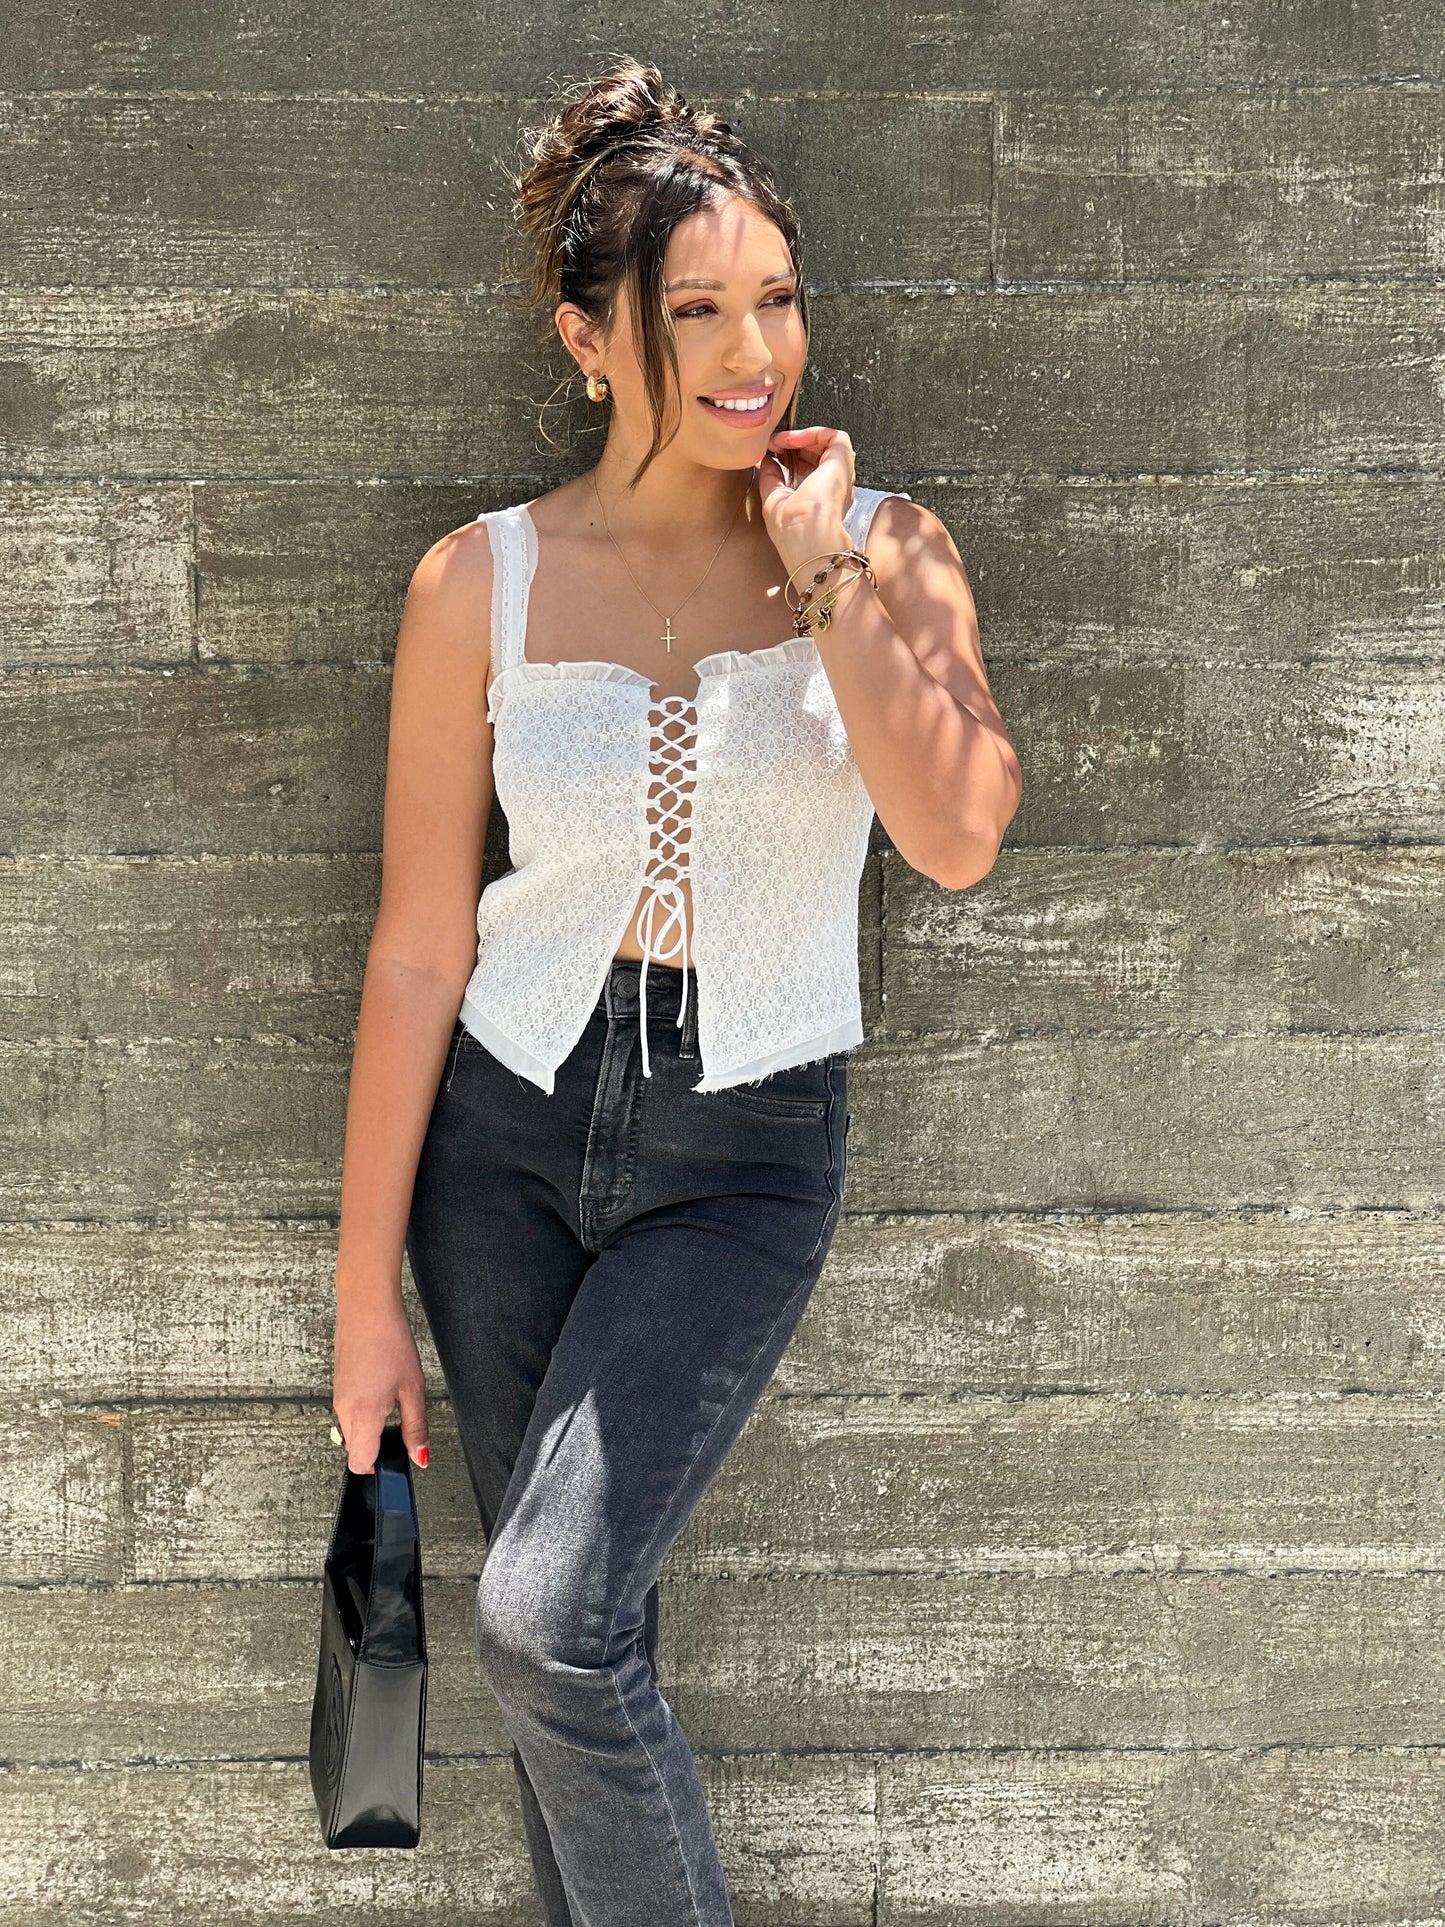 The model is tanned skinned and looking off to the side with one hand holding her hair. The other hand she is holding a black small handbag. She is wearing a white sleveless lace top and black jeans. 